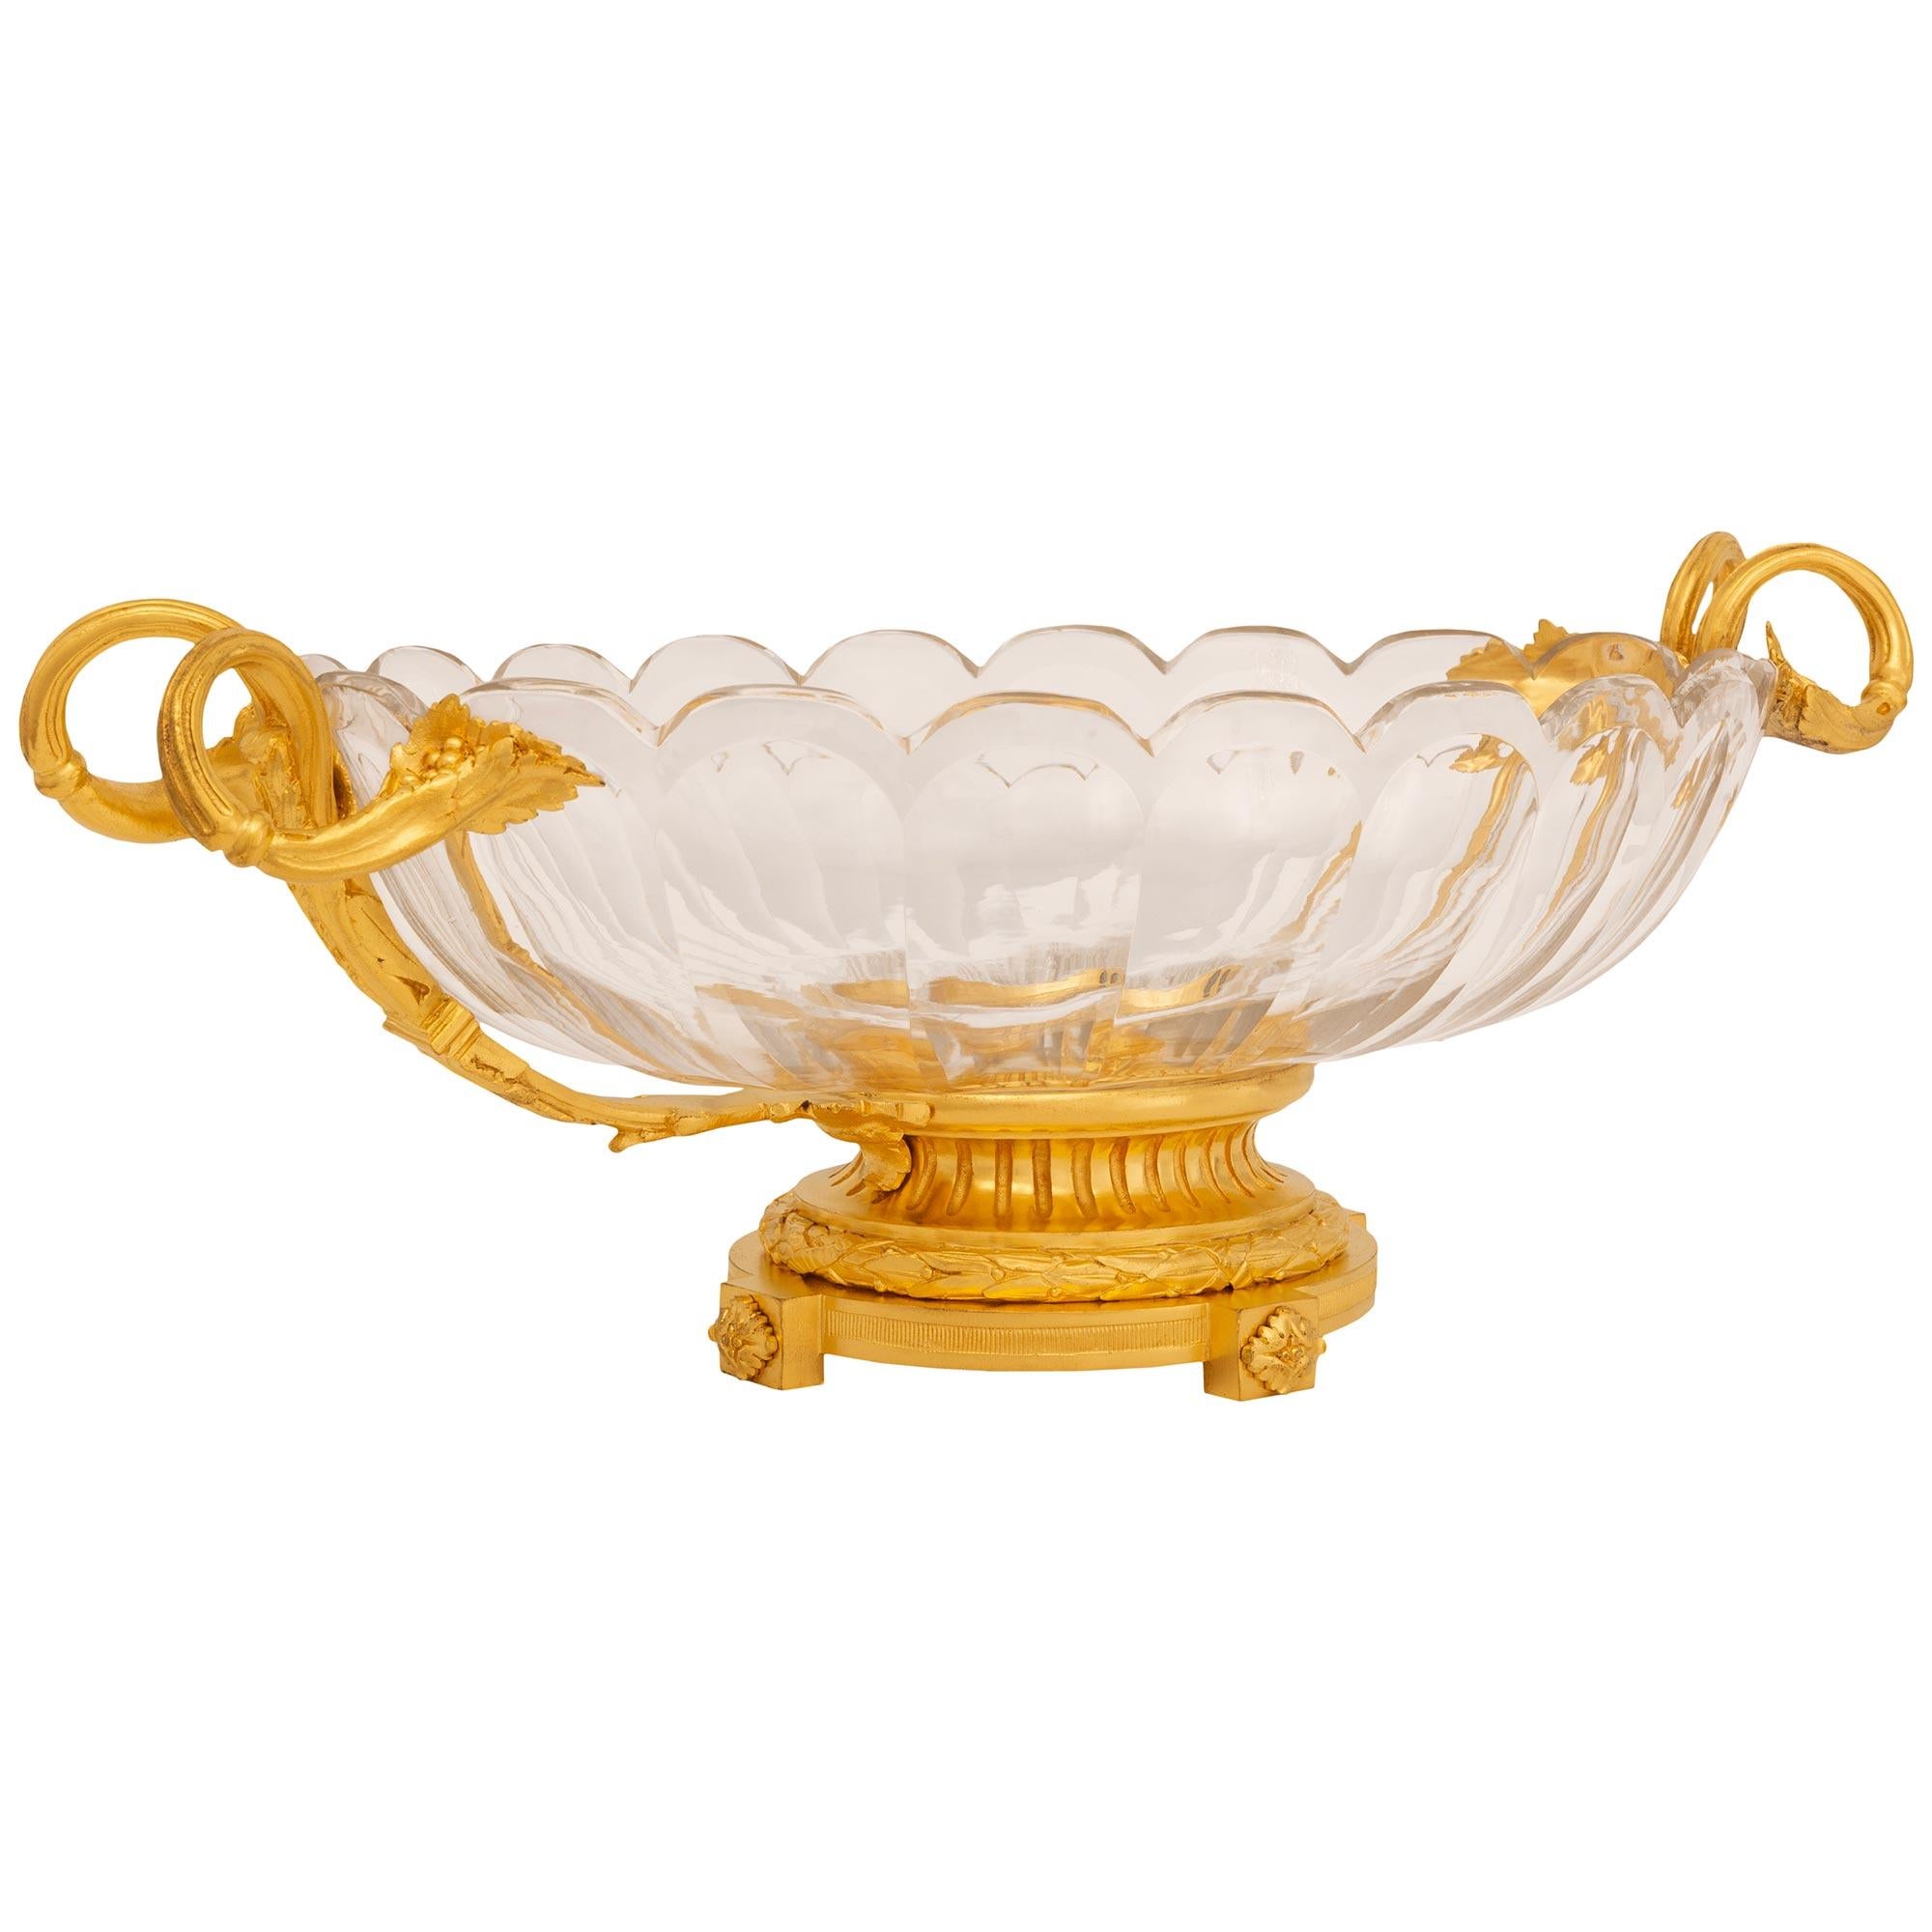 French 19th Century Belle Epoque Period Ormolu And Baccarat Crystal Centerpiece In Good Condition For Sale In West Palm Beach, FL